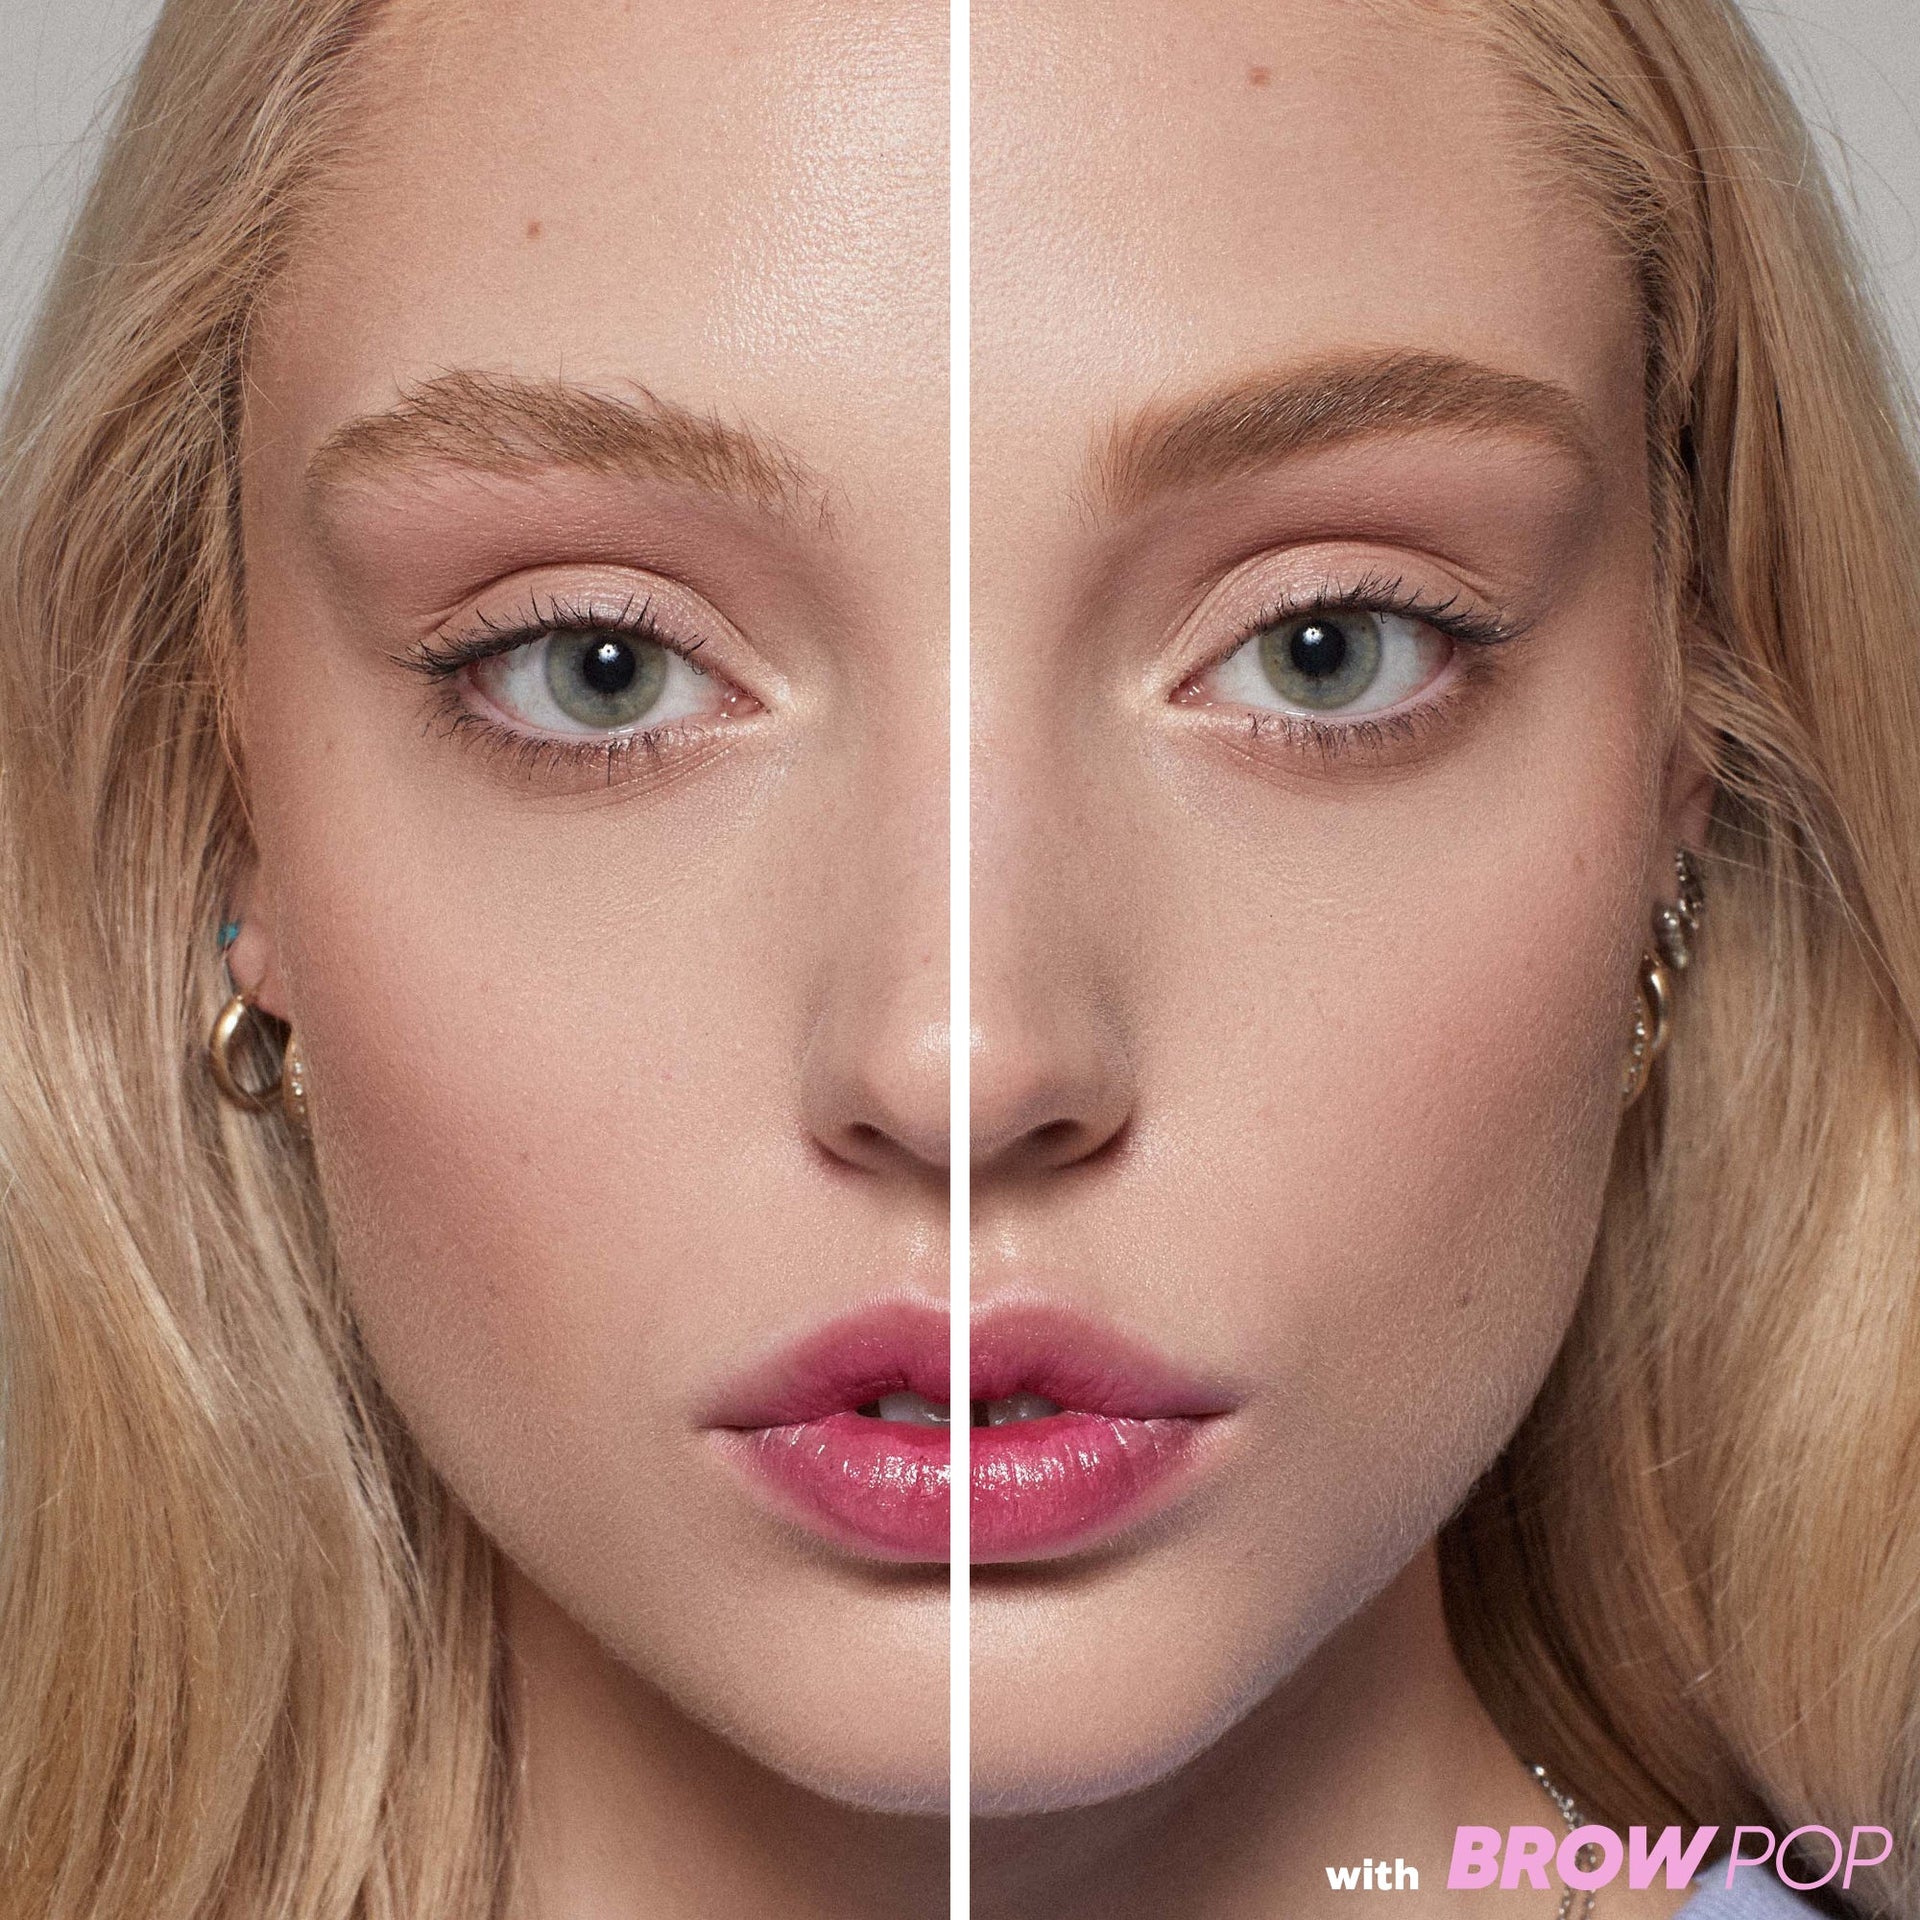 Before and after application of 'Honey Blonde' Brow Pop shade.